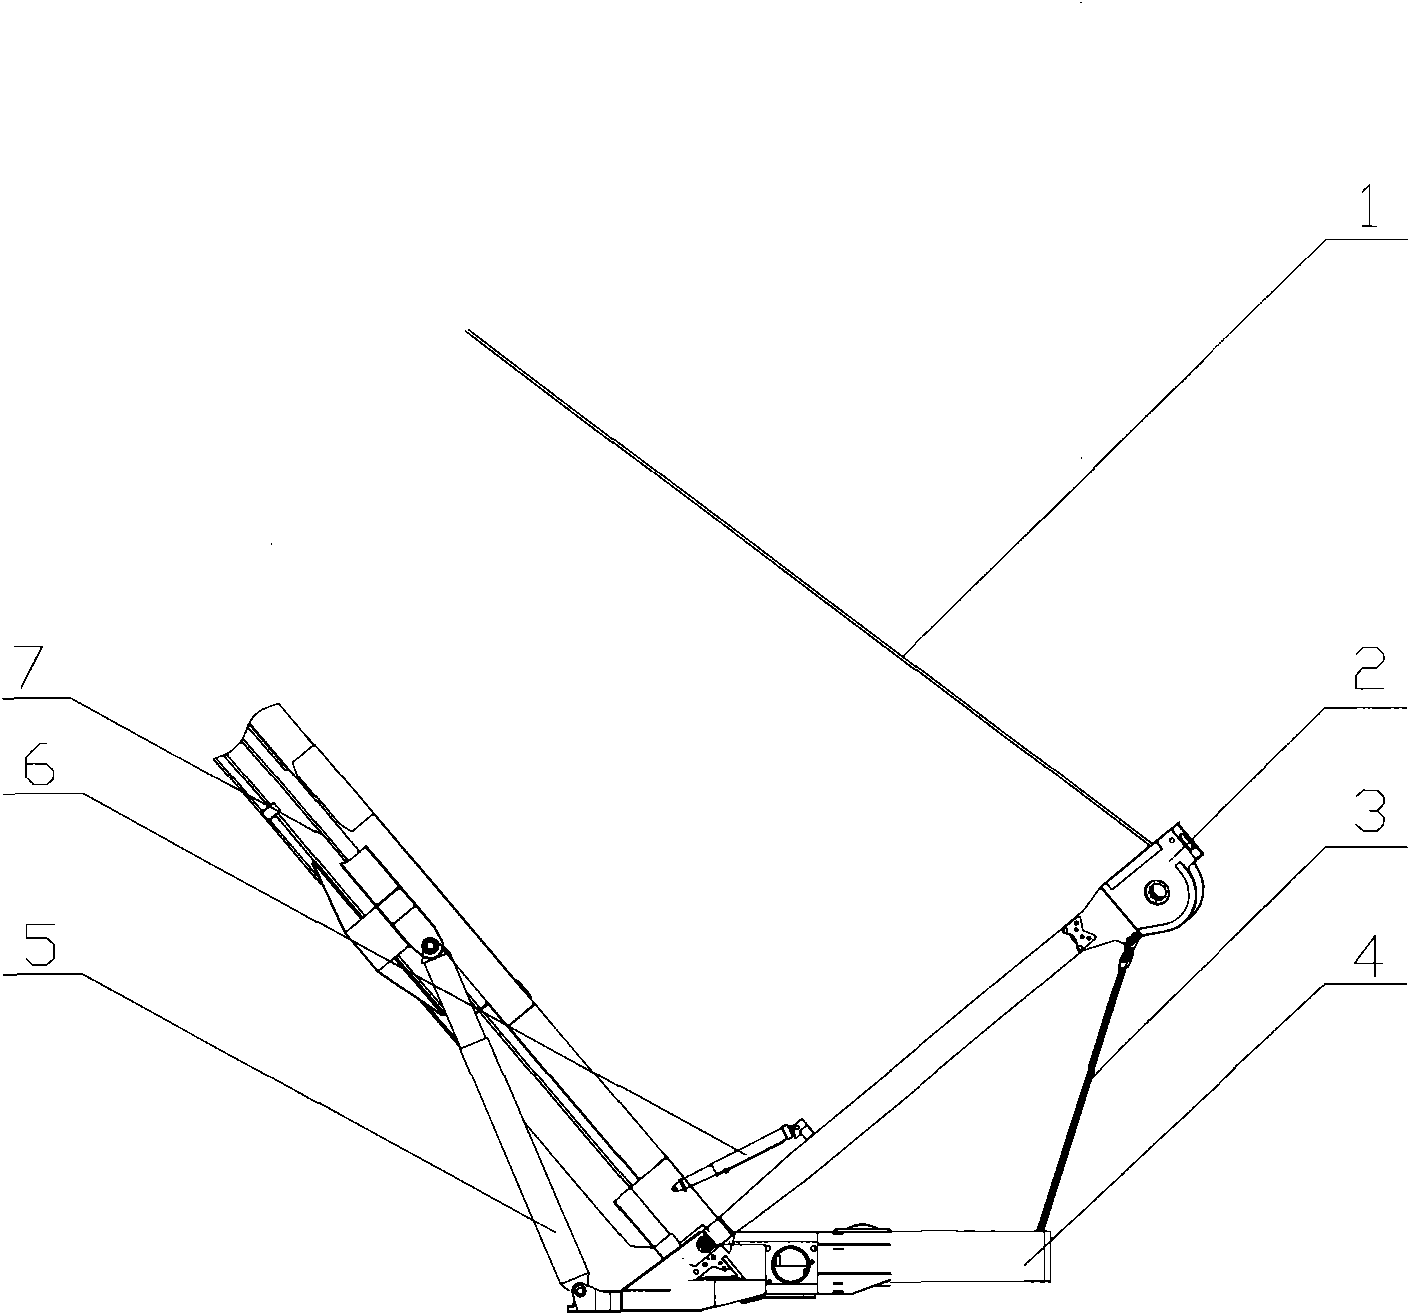 Lift and superlift device thereof